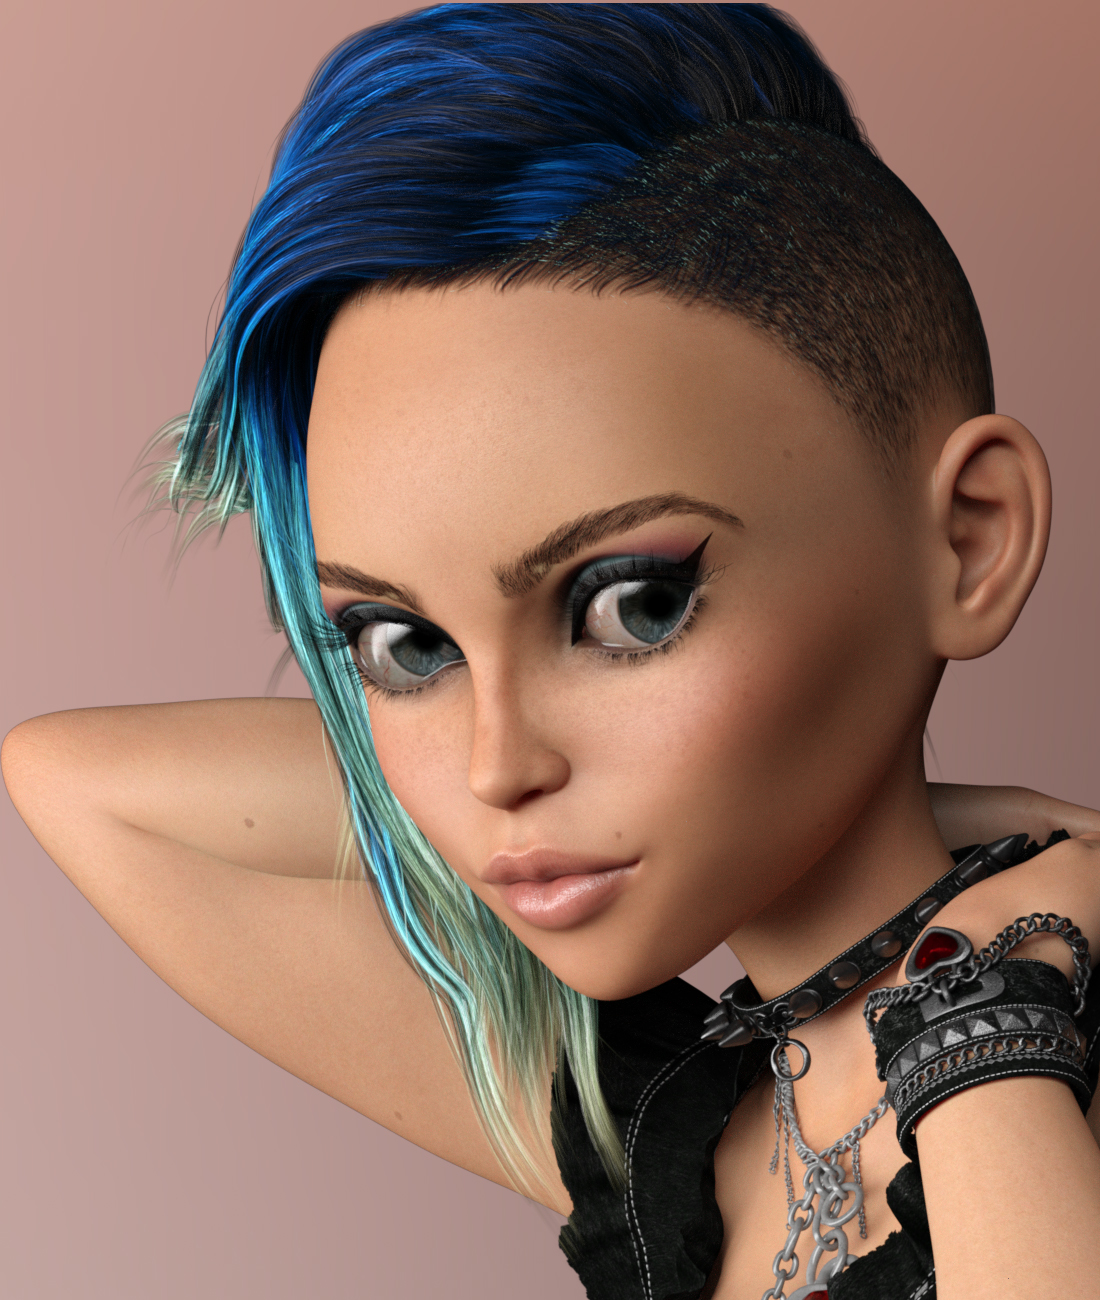 Vanessa for The Girl 8 by: 3DSublimeProductionsVex, 3D Models by Daz 3D